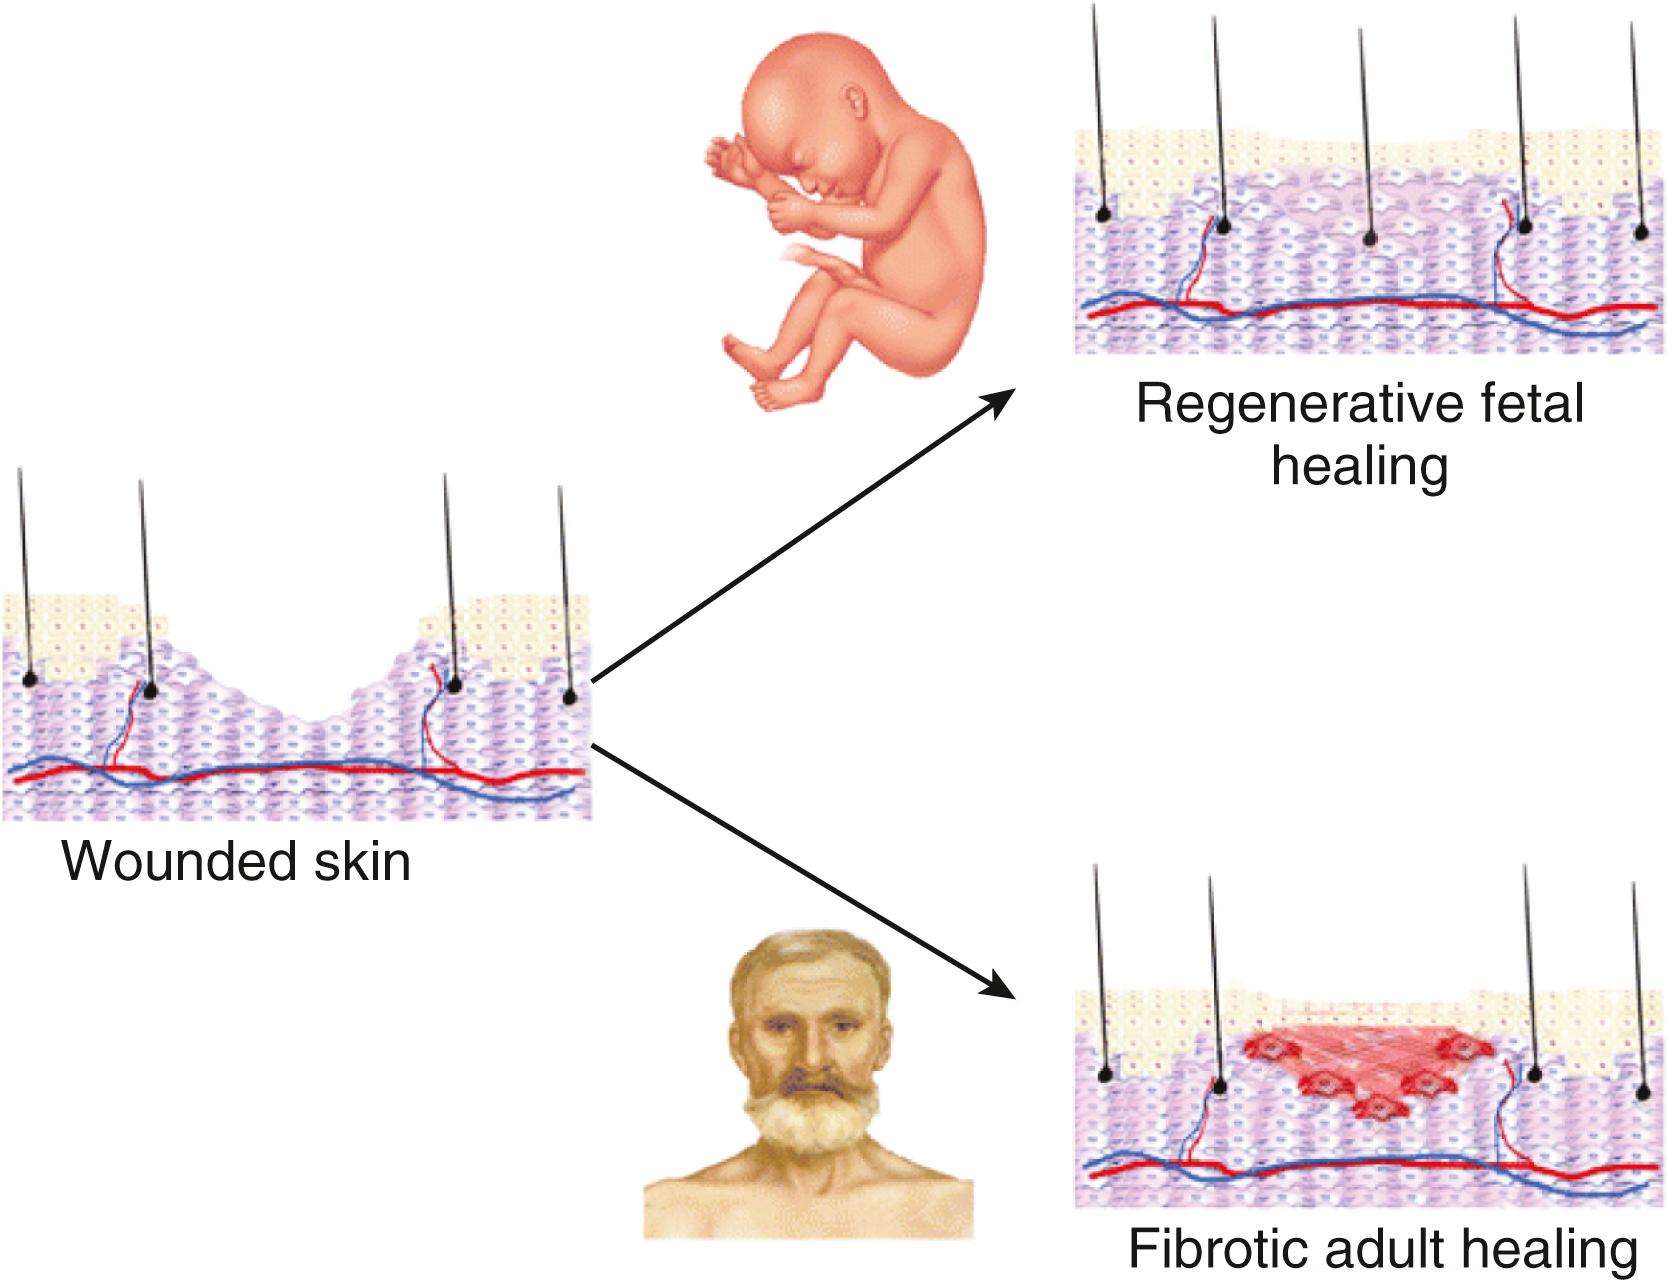 Figure 23.4, Fetal skin heals back to its original state without forming scar, unlike fibrotic adult wound healing.